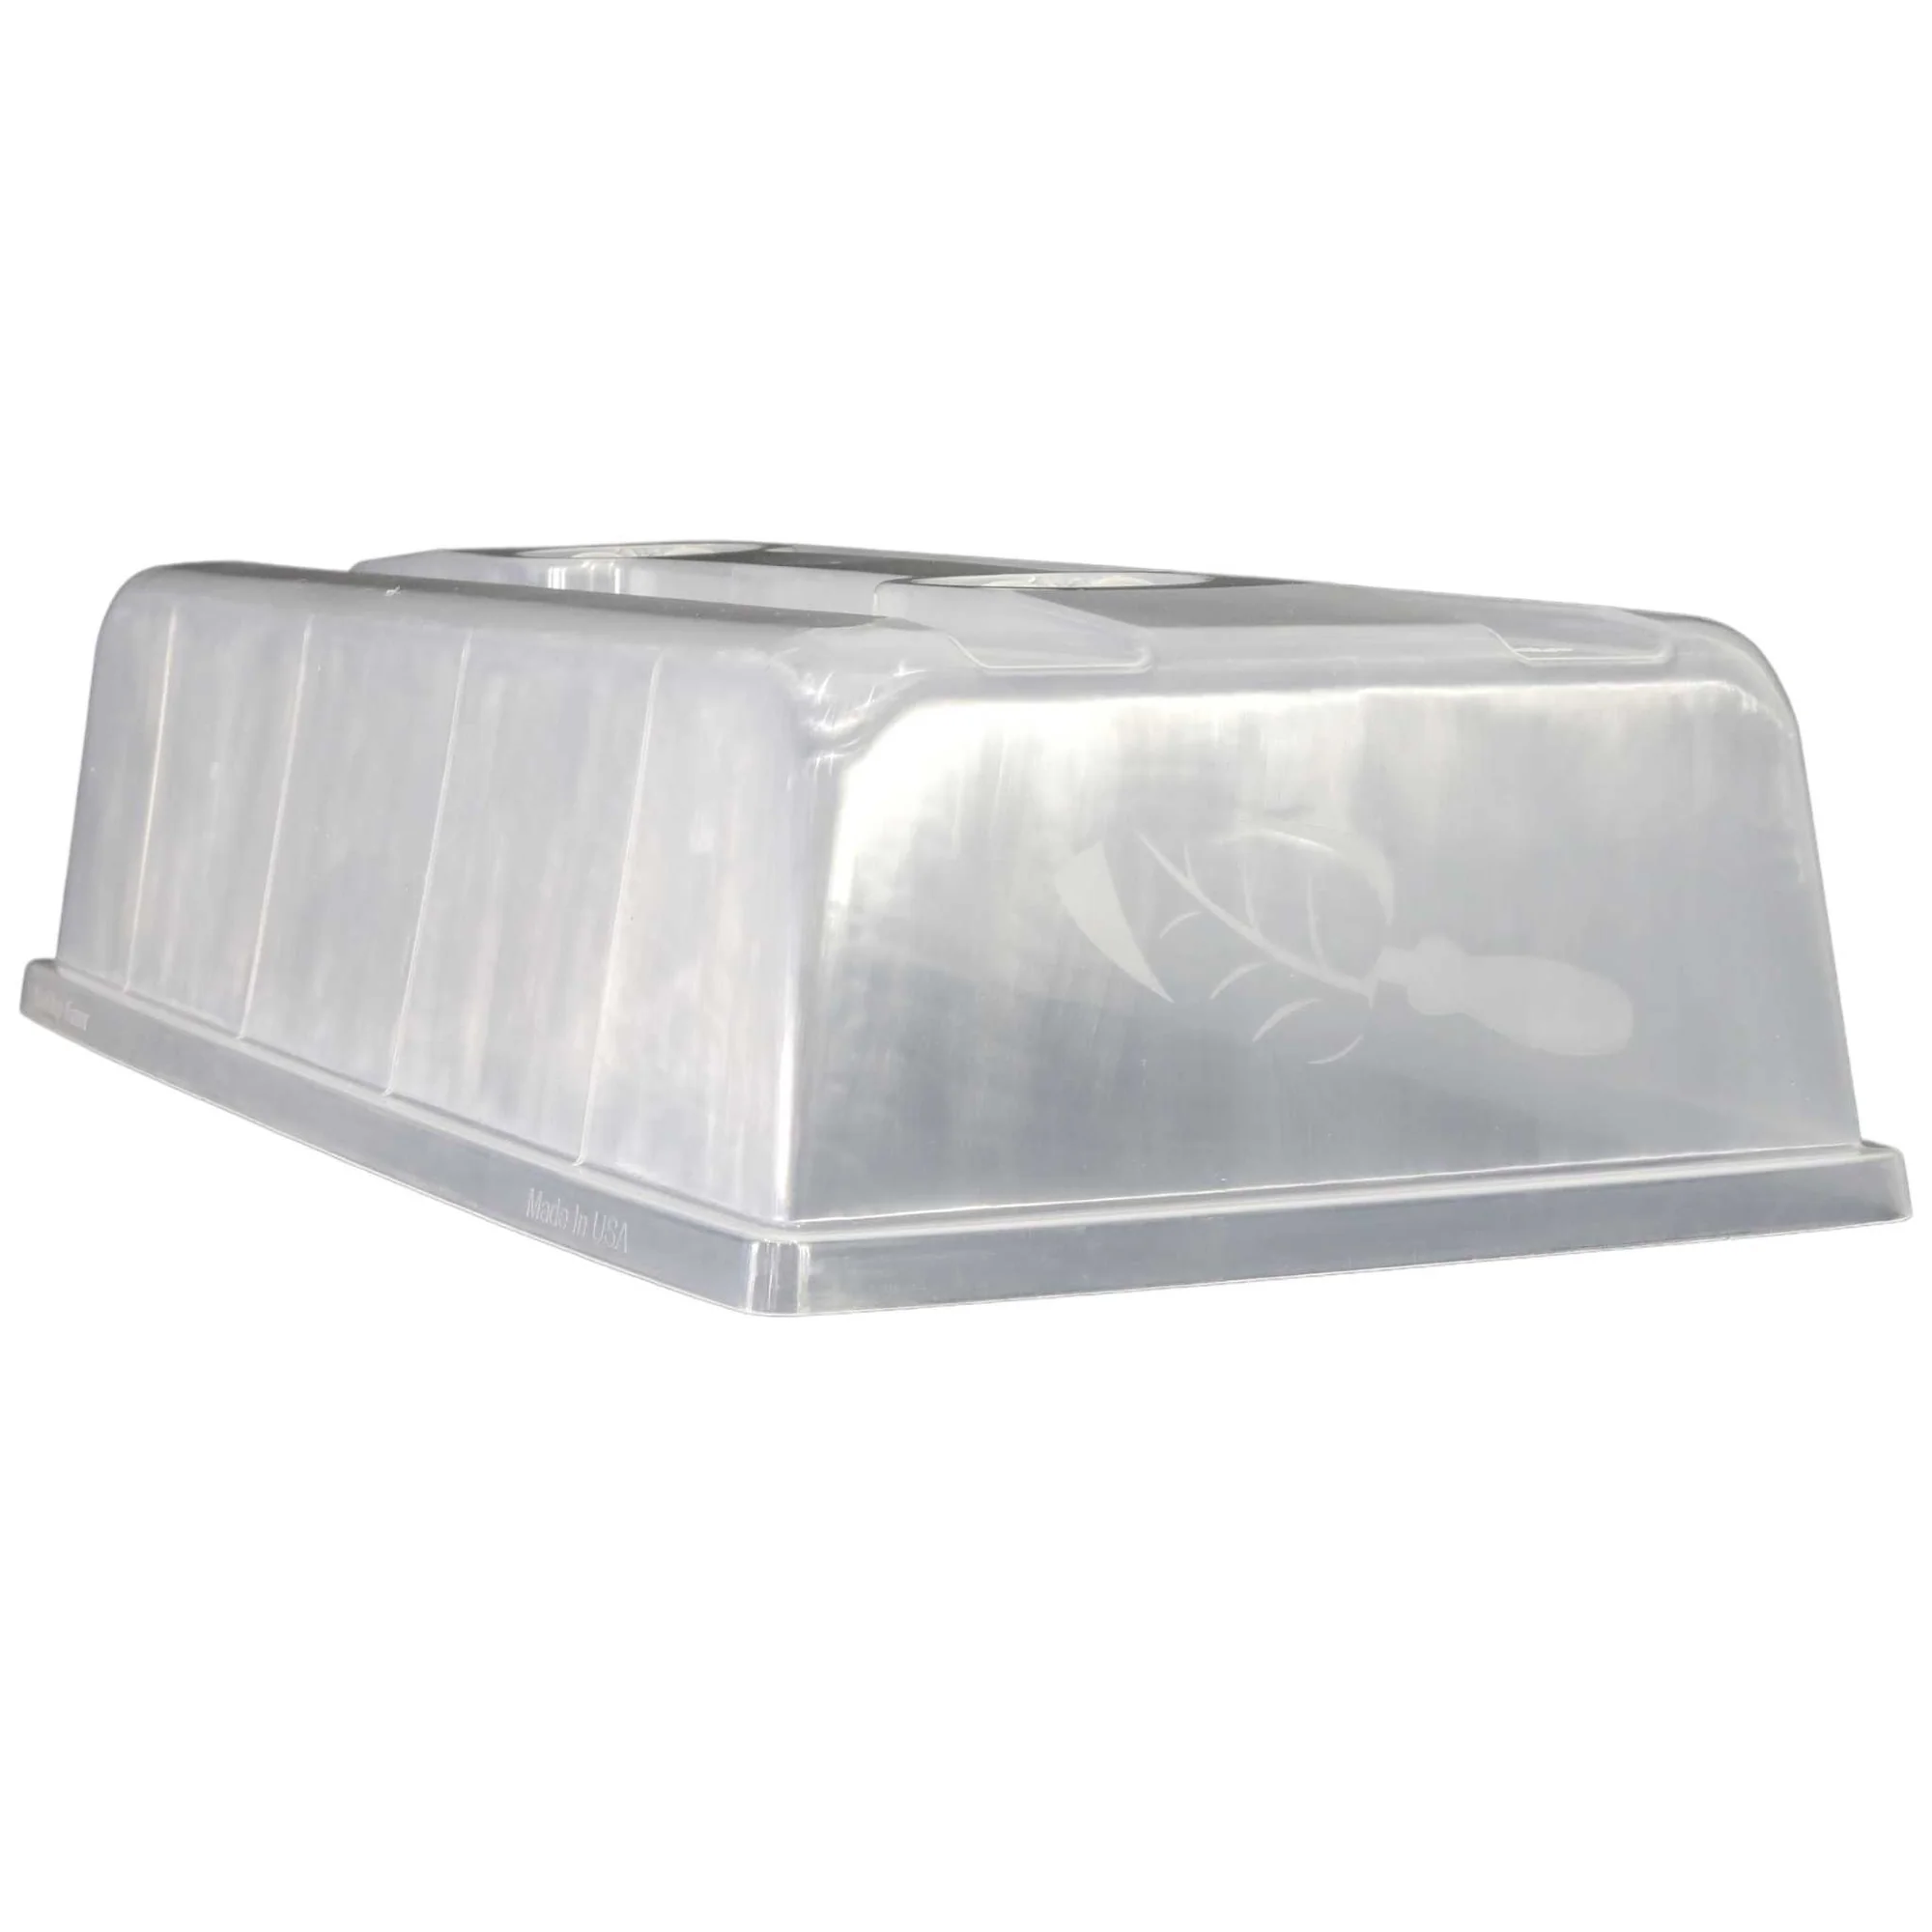 Bootstrap Farmer 1020 Humidity Dome Tray Lids 6"